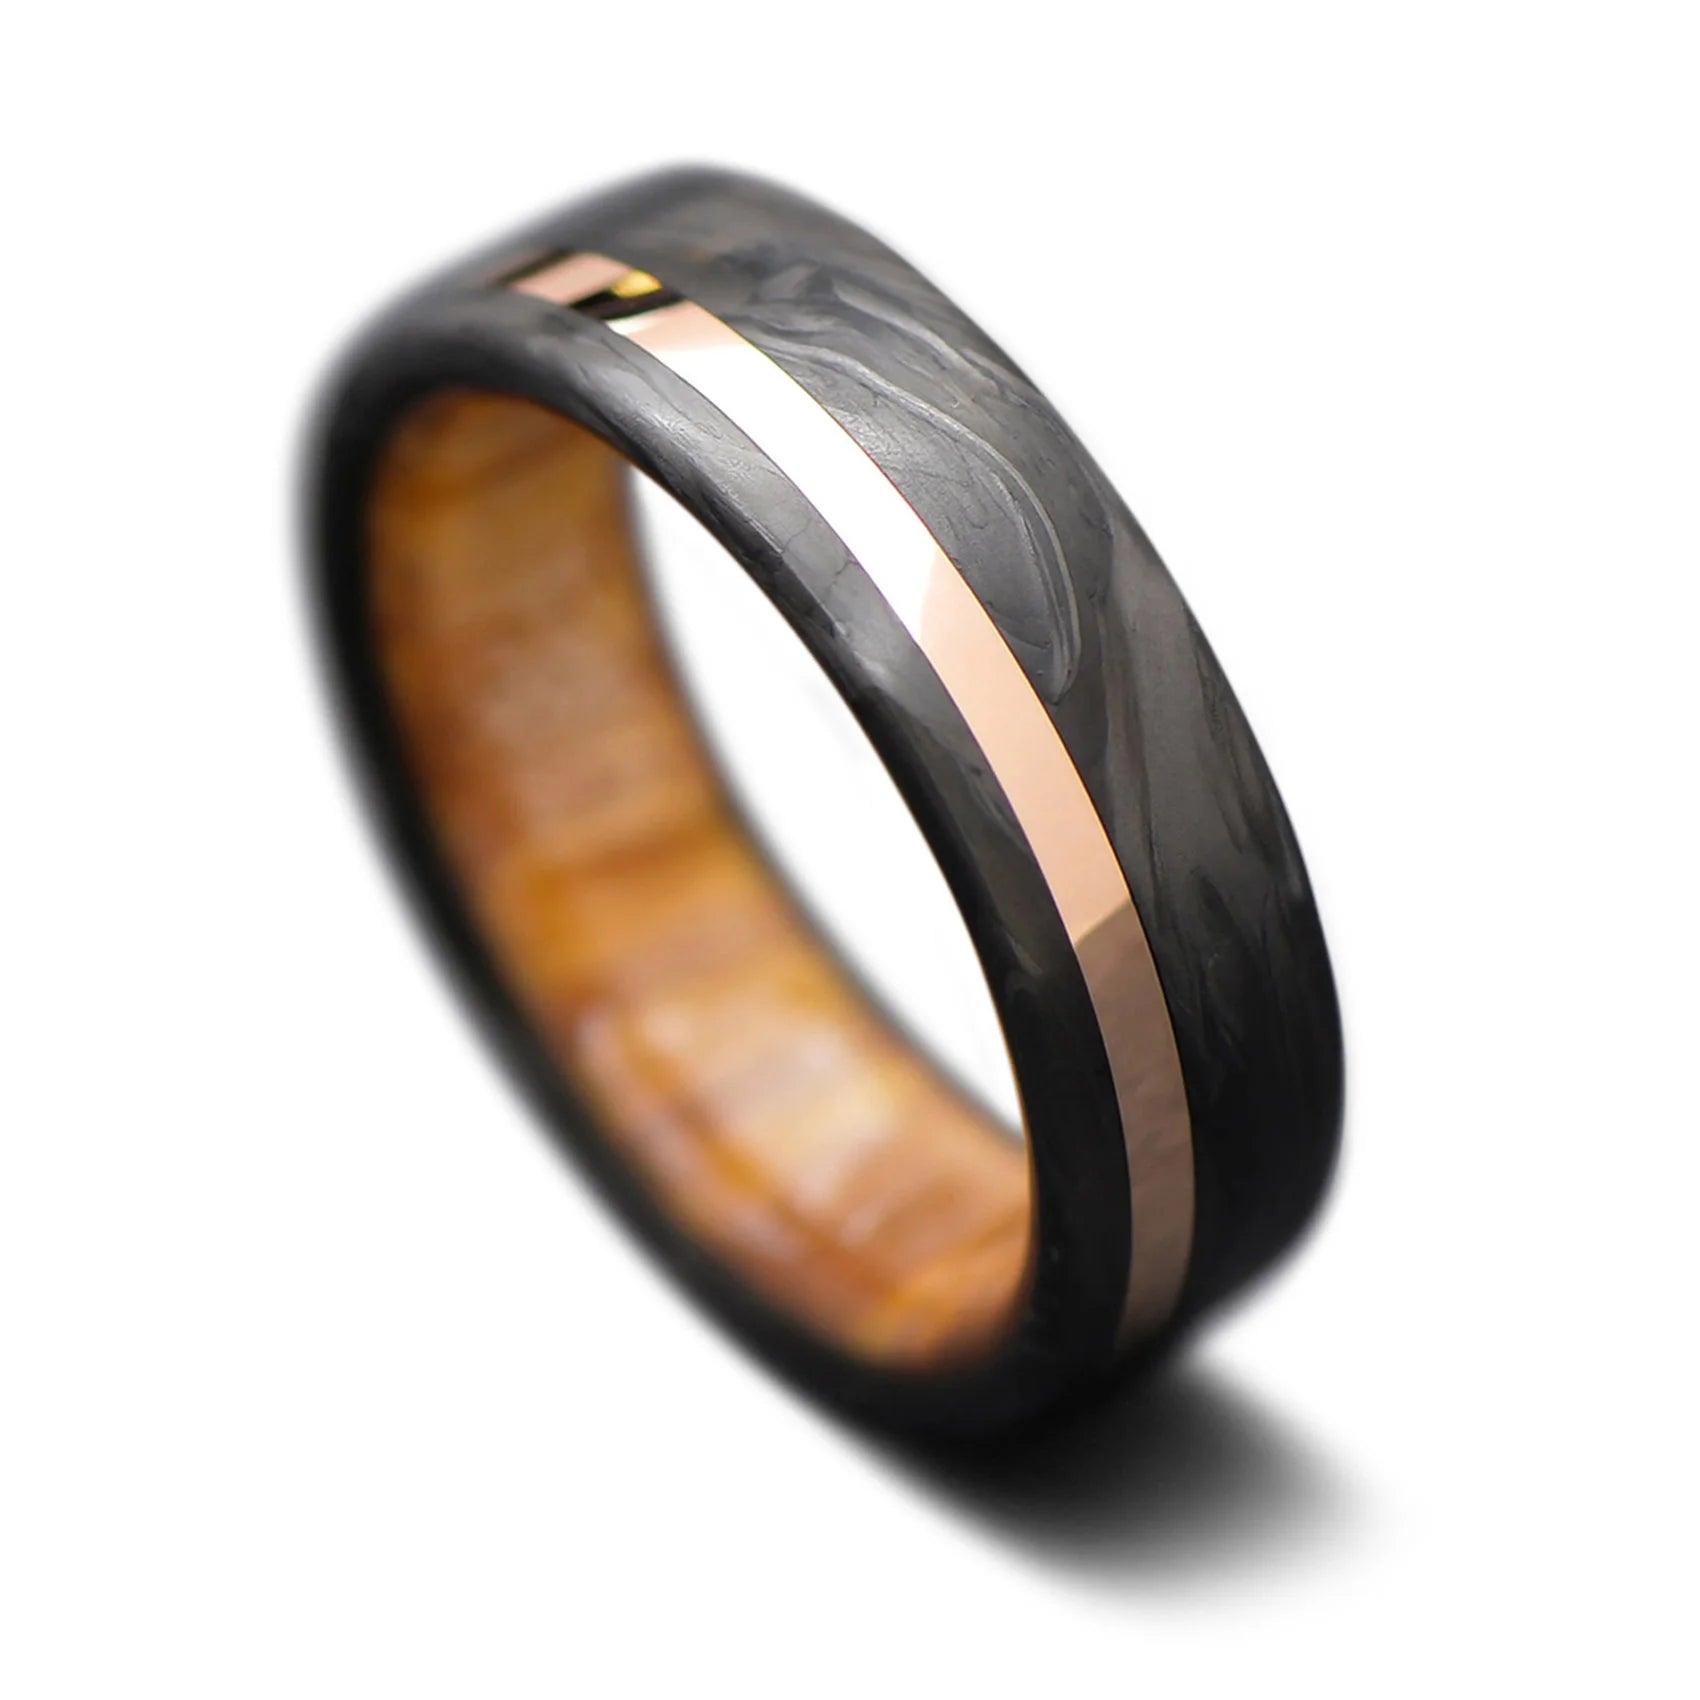 Carbon fiber and rose gold wedding ring, modern and unique ring